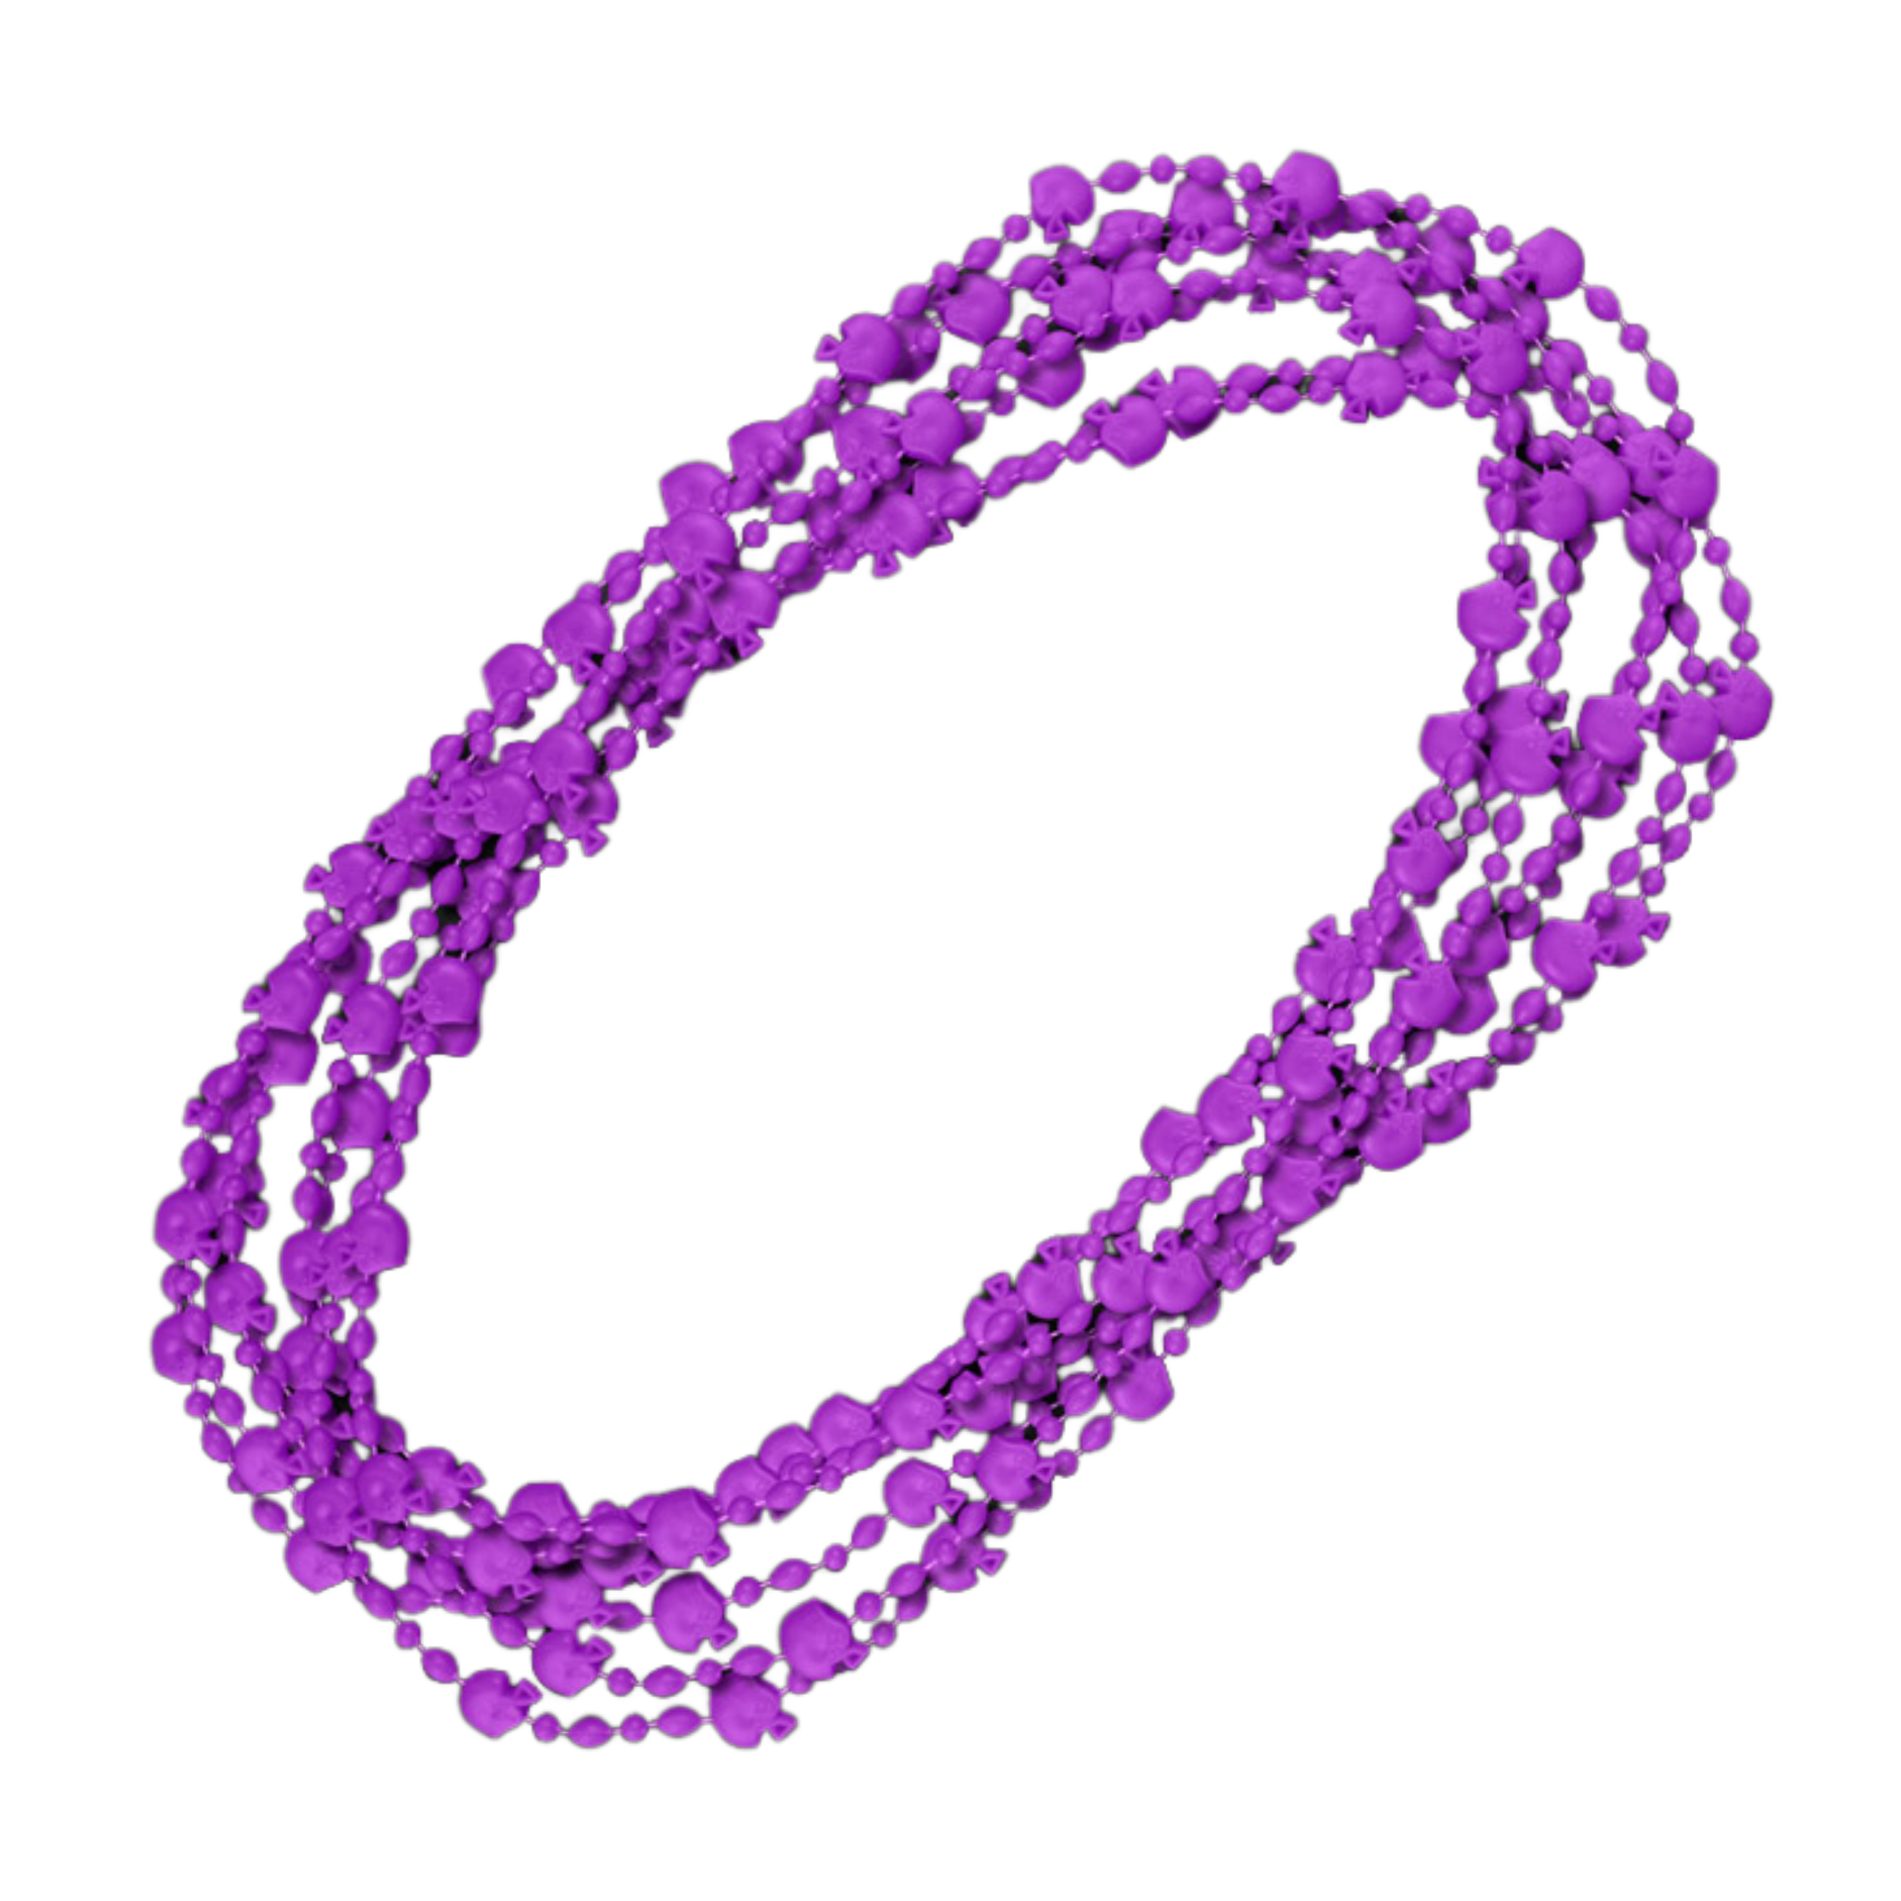 Football Helmet Bead Necklaces Non Metallic Purple Pack of 12 All Products 6